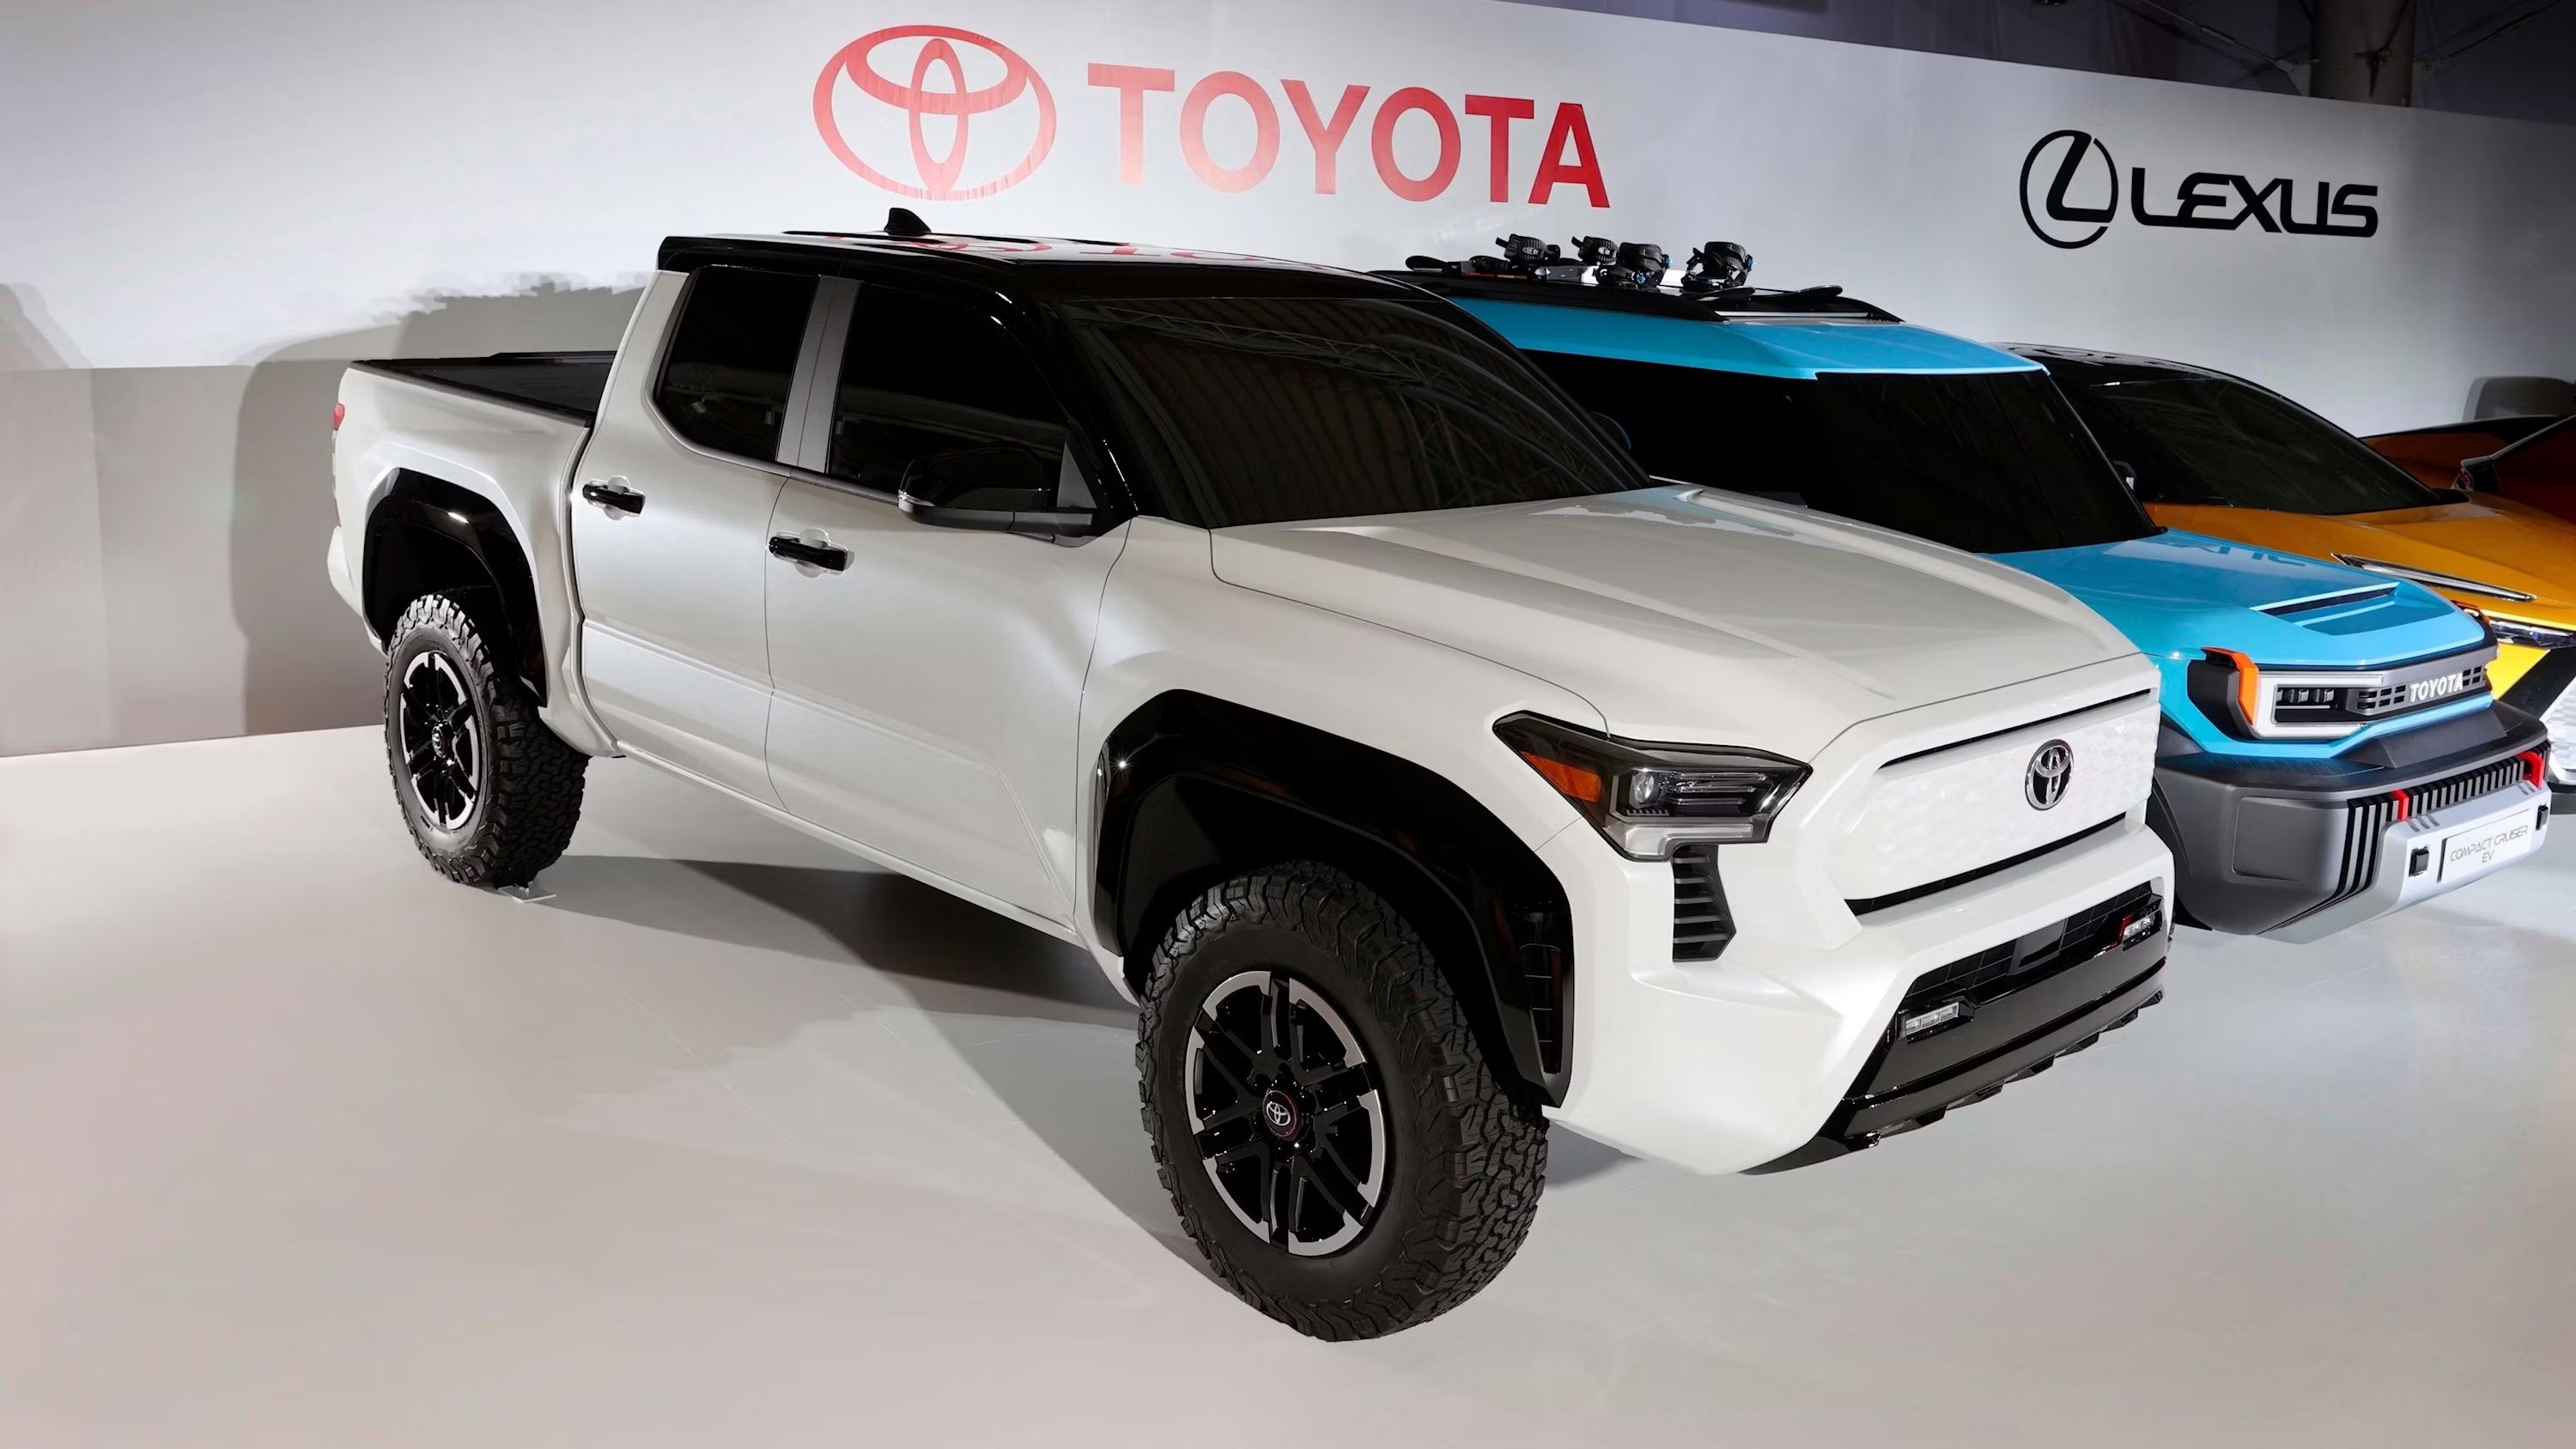 Toyota Confirms Electric Hilux Pickup Truck Coming In 2025, But Will An Electric Tacoma Follow?